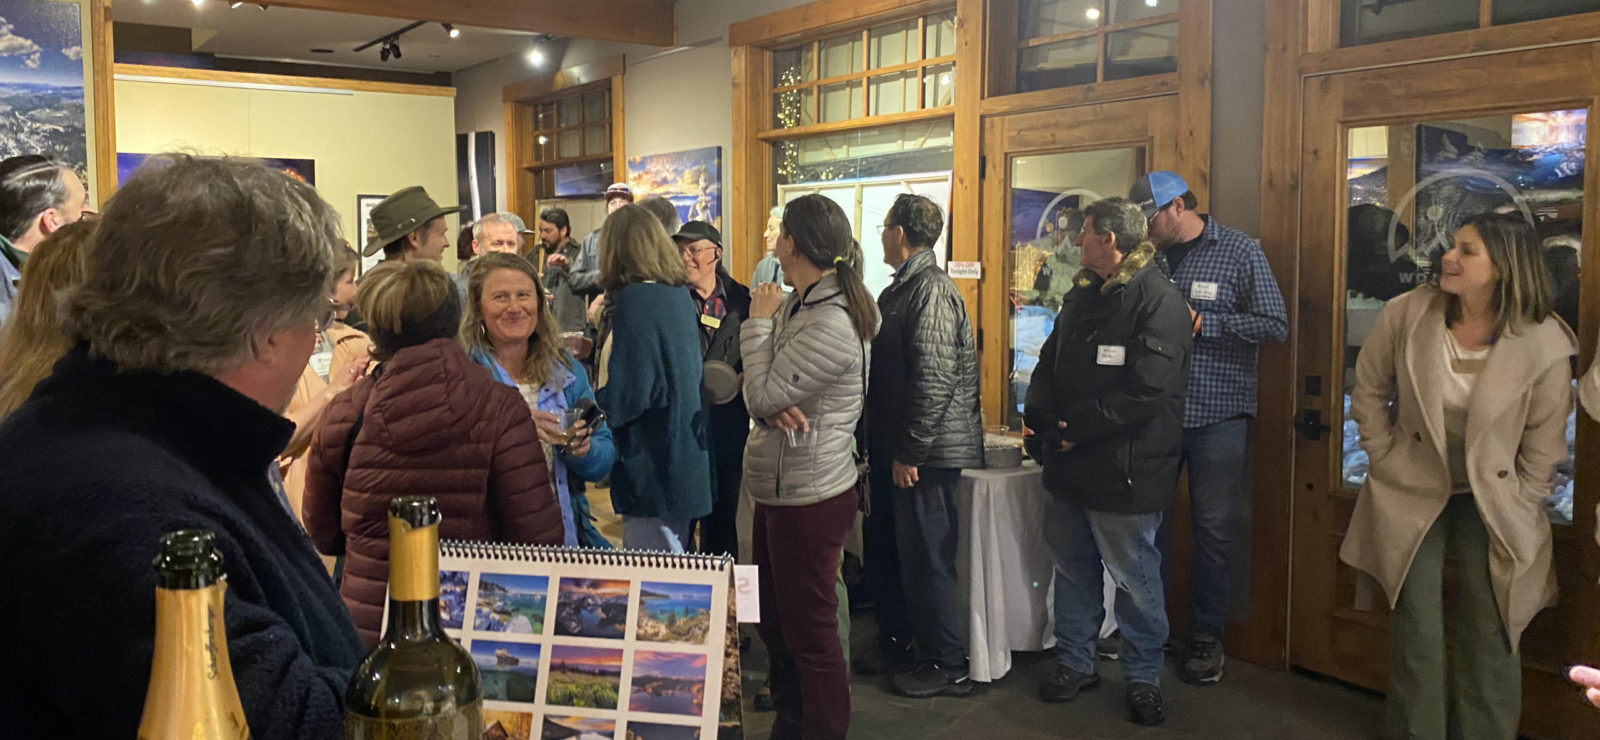 February Mixer - Block Party Downtown at Grizzly Menswear, Alpenglow Gallery, and Lorien Powers Studio Jewelry